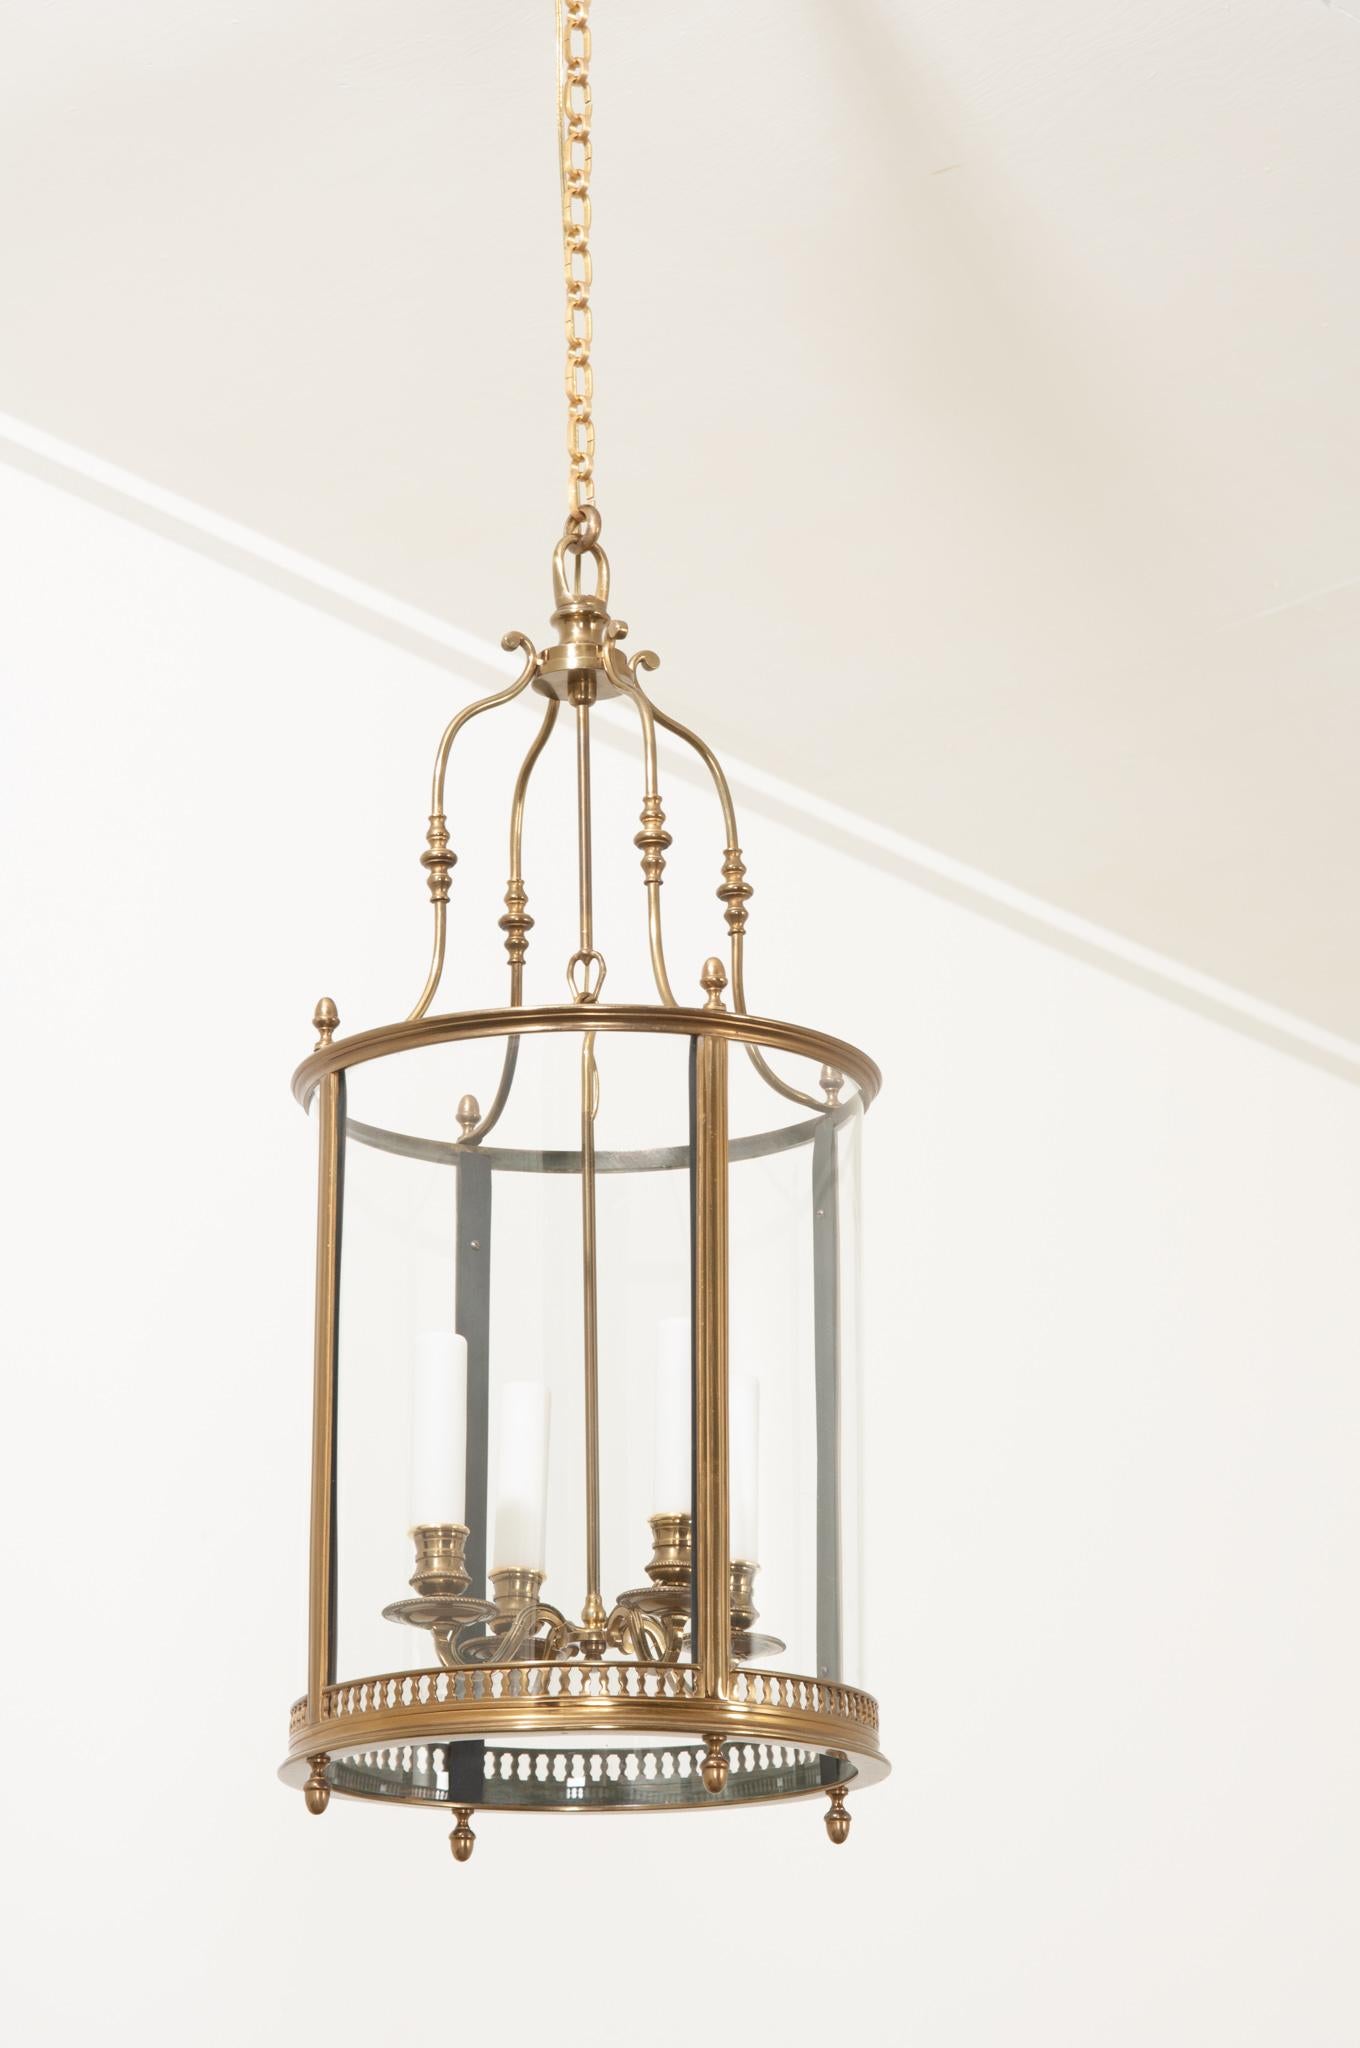 This medium sized brass and glass lantern is perfect wherever a single fixture is needed. A simple 5” diameter canopy sits flush to the ceiling and connects to a classic brass chain to support the whole. Four scrolling arch-forms hook onto the